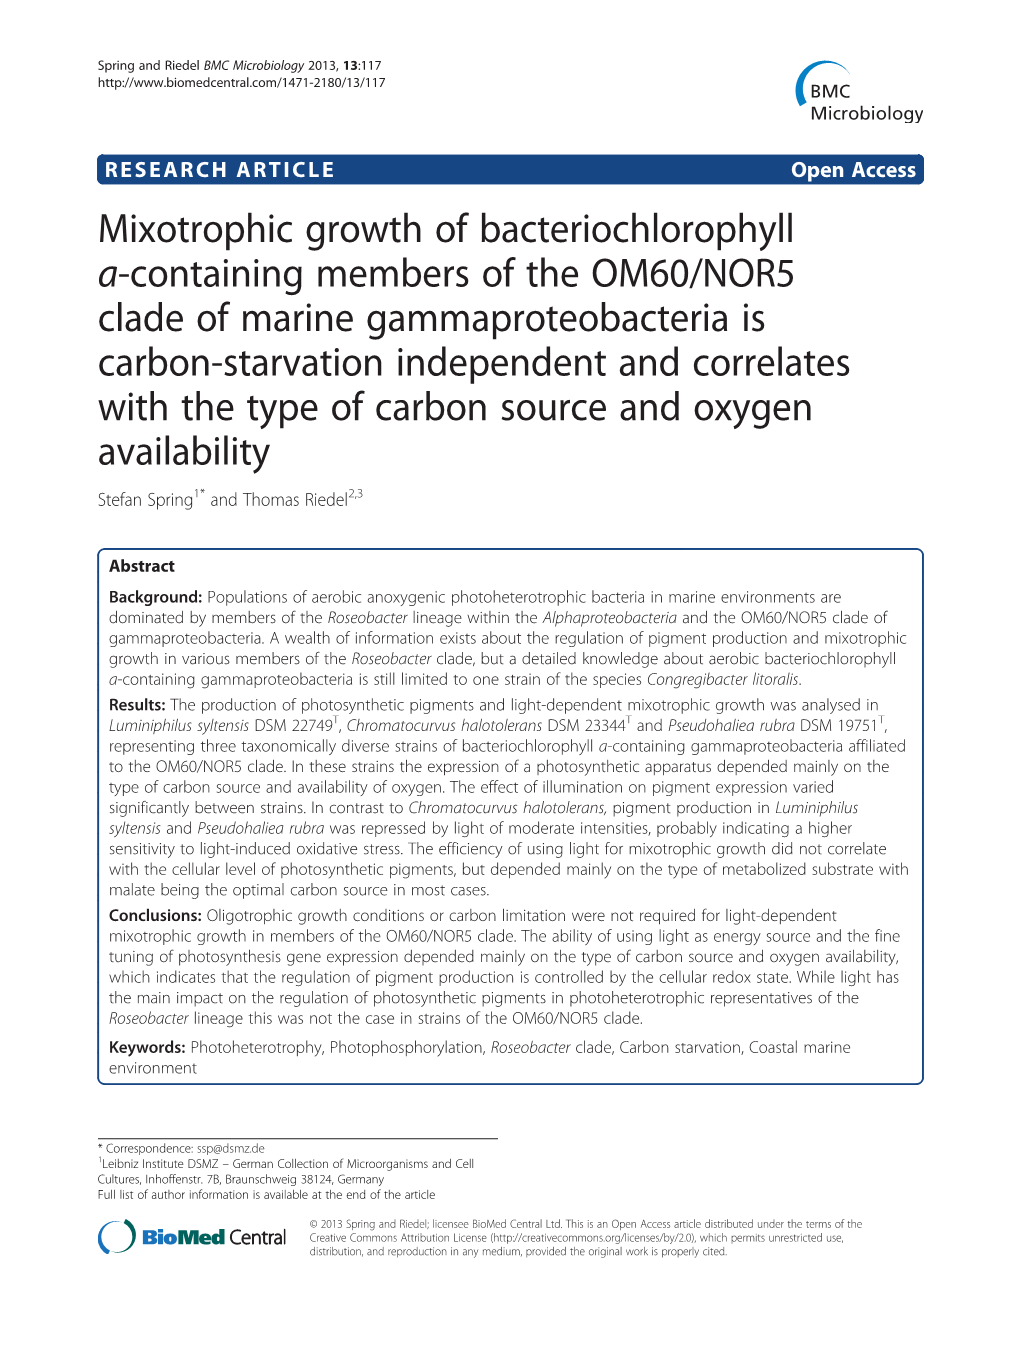 Mixotrophic Growth of Bacteriochlorophyll A-Containing